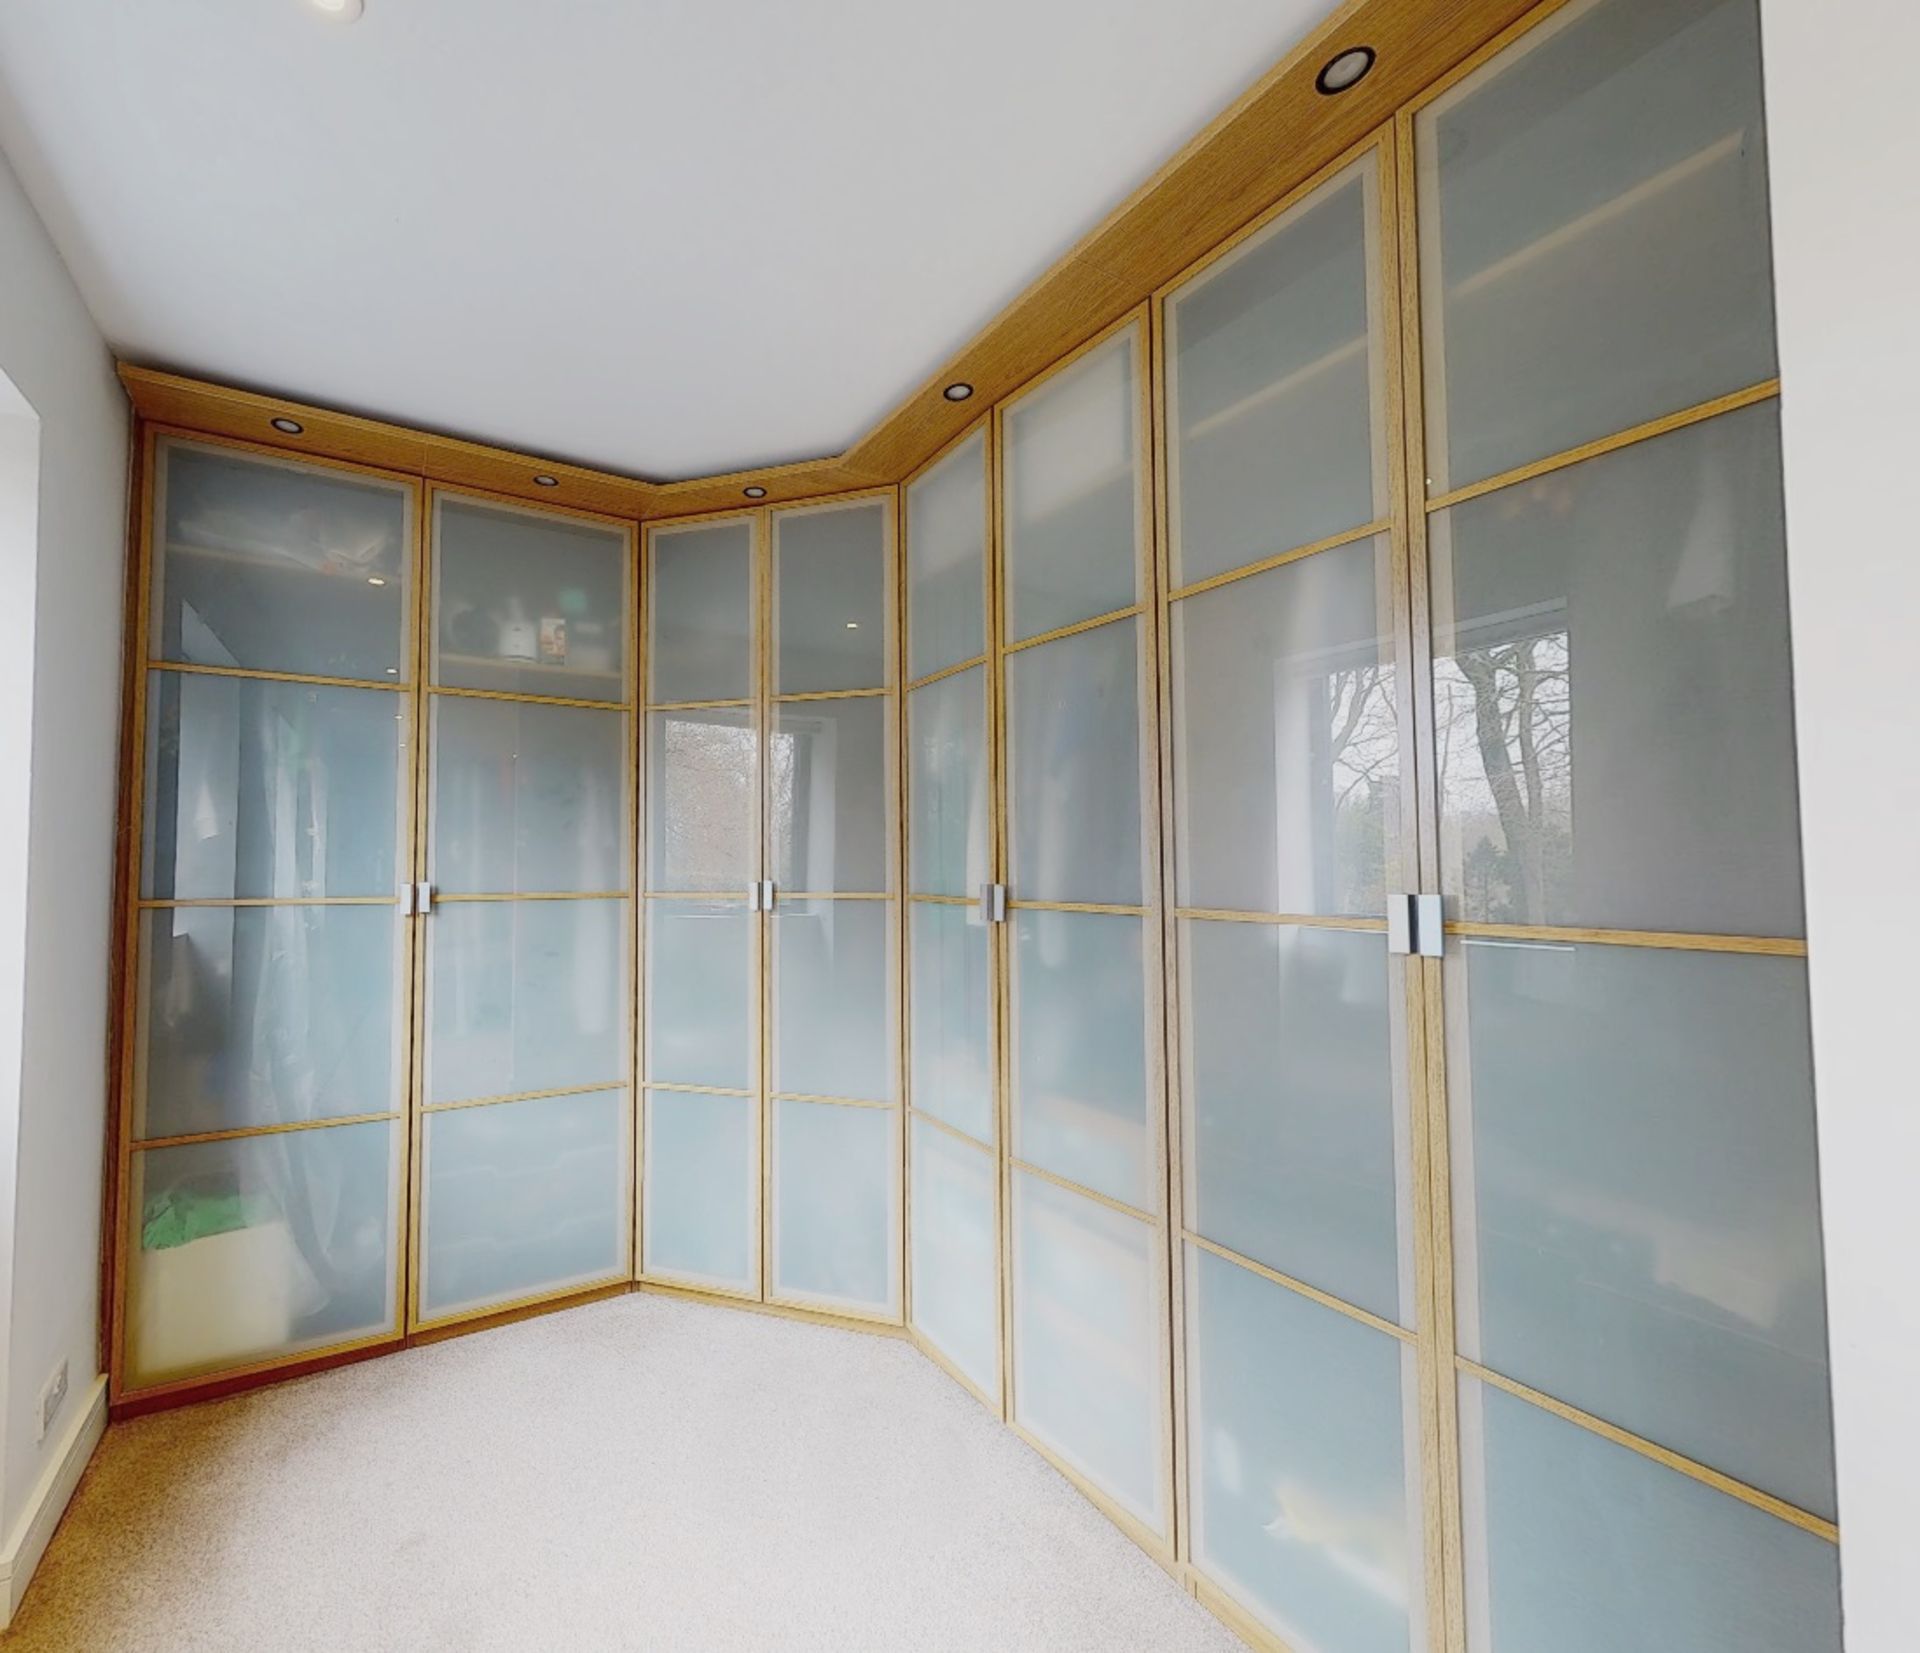 Large Bank Of Bespoke Fitted Master Bedroom Wardrobe Storage With Frosted Glass 8-Door Frontage -